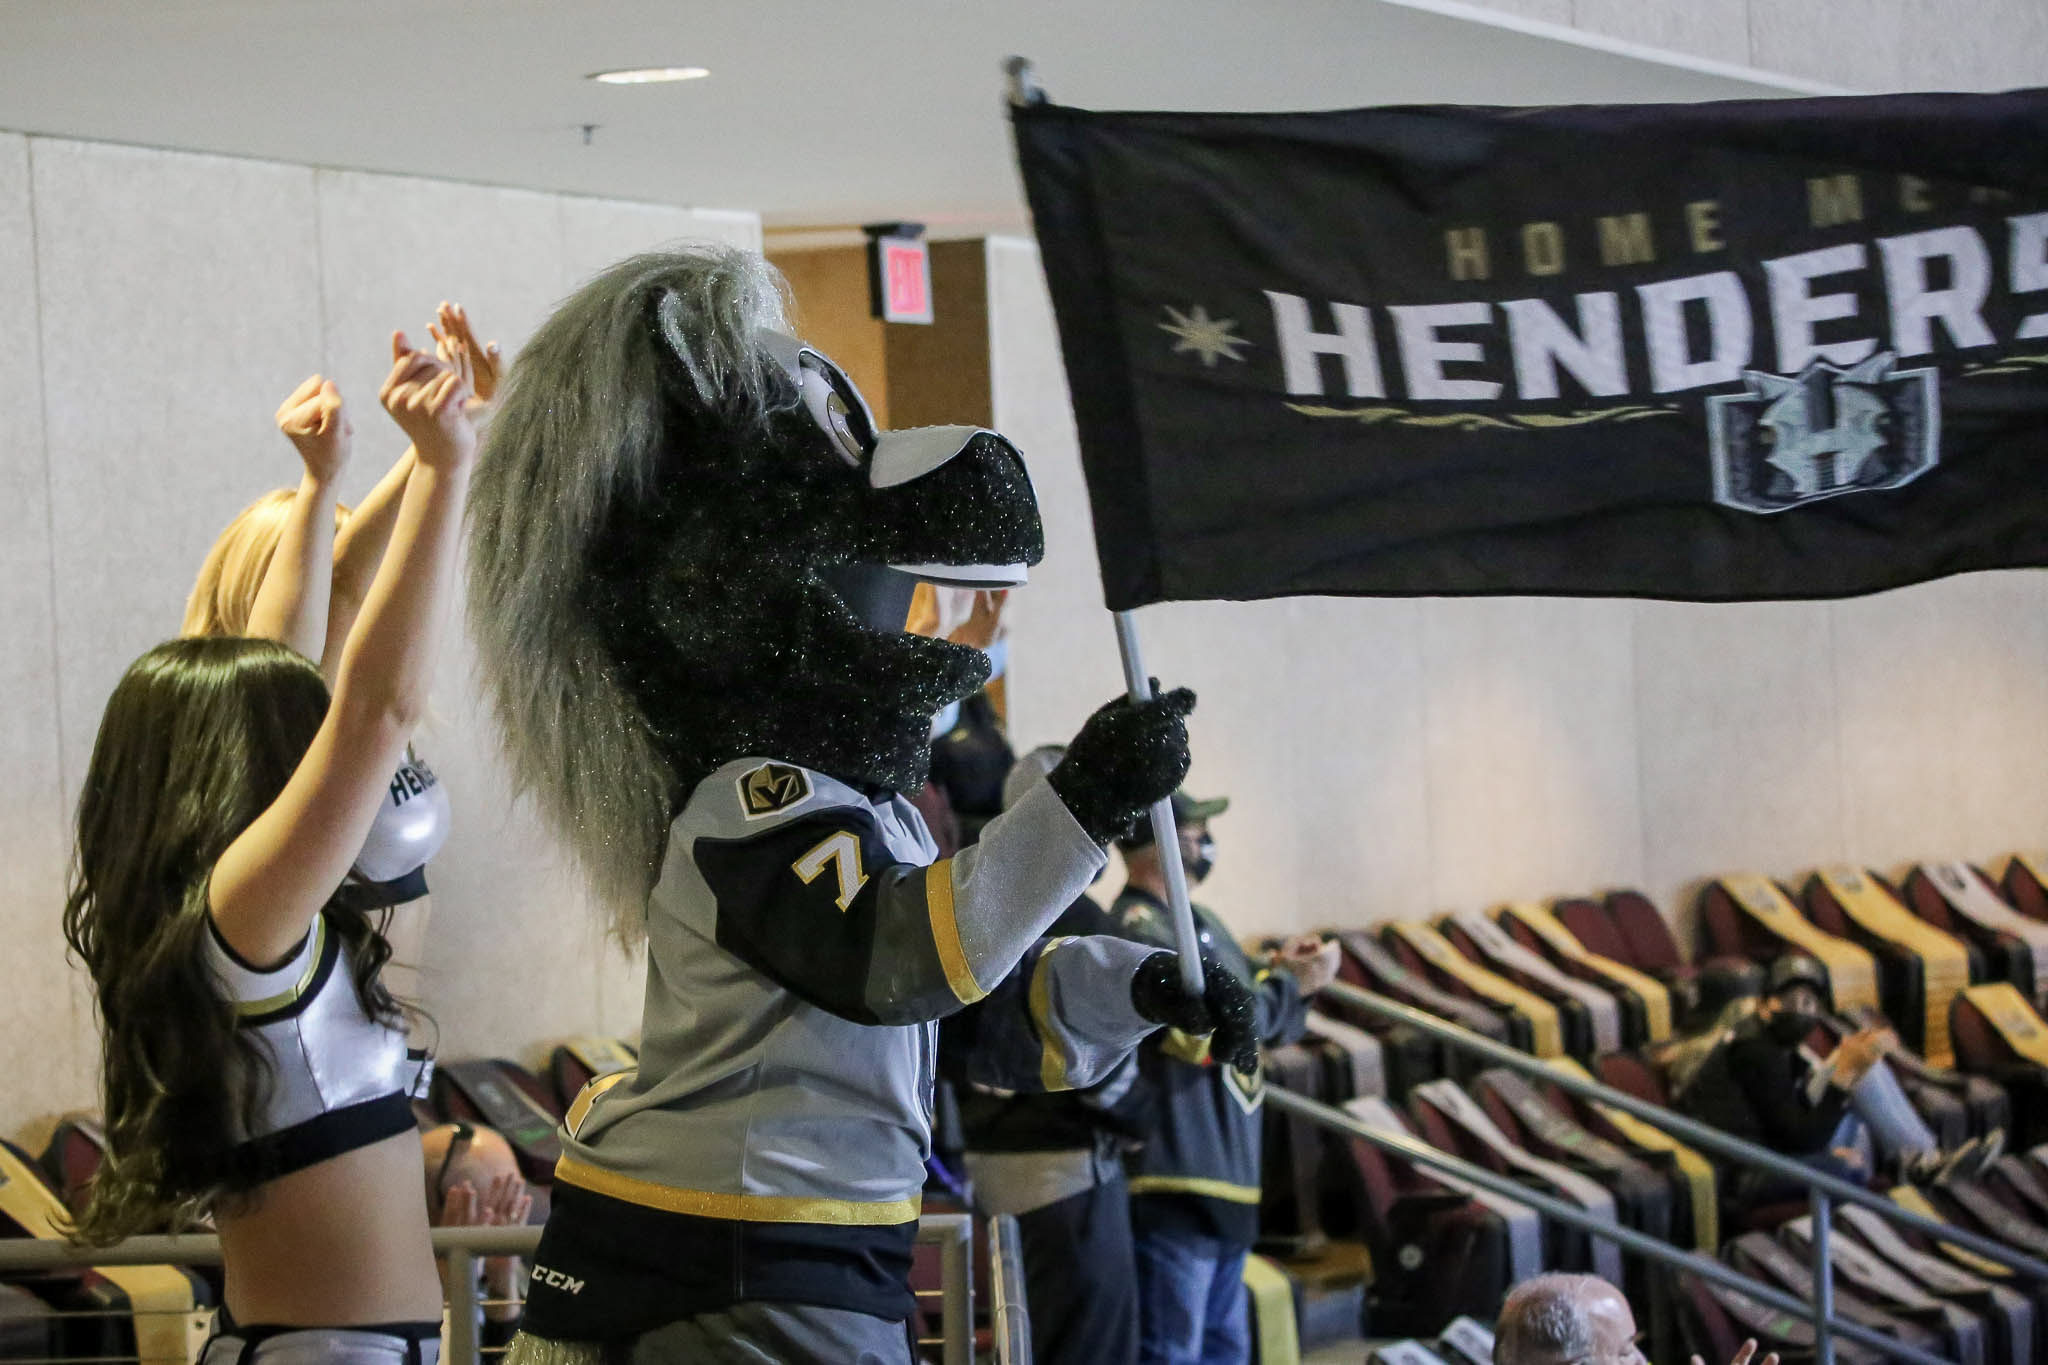 COVID-19 and Sports: Fans Attend Henderson Silver Knights Game For